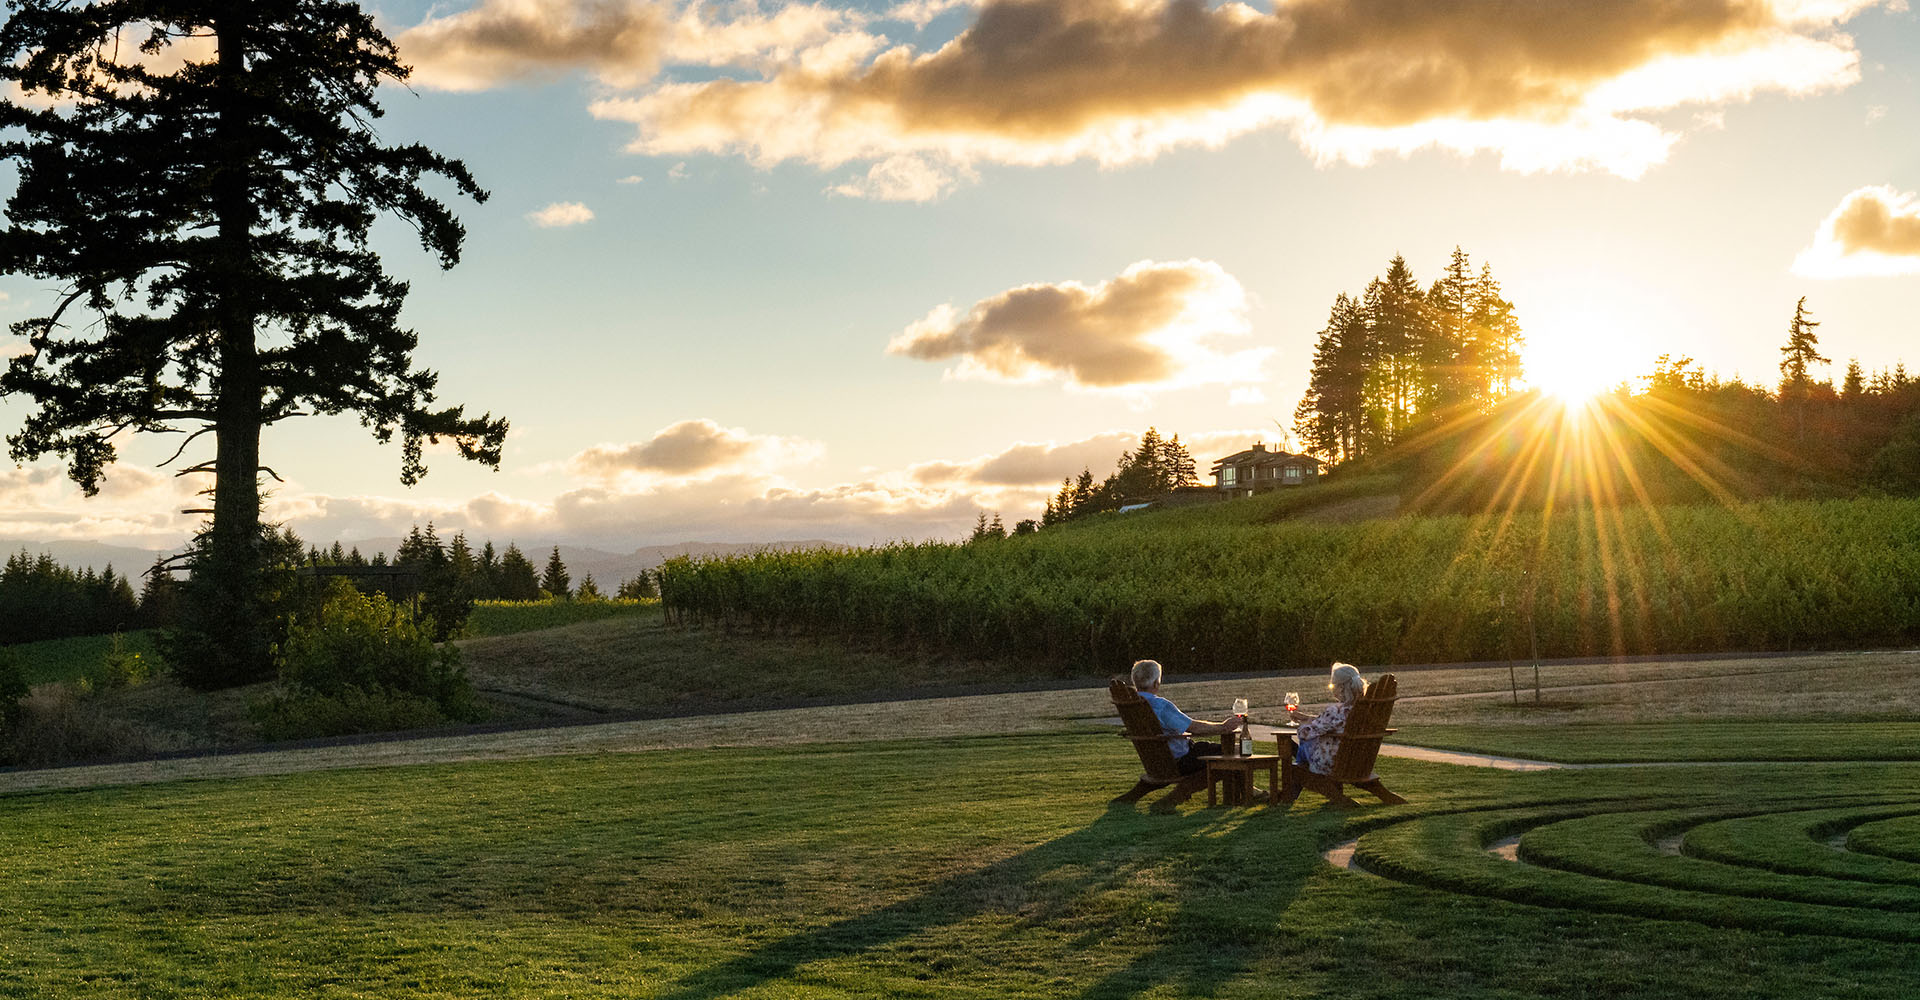 Two guests seated in Adirondack chairs with wine glasses on the green lawn watching the sunset at Fairsing Vineyard in Oregon's Willamette Valley